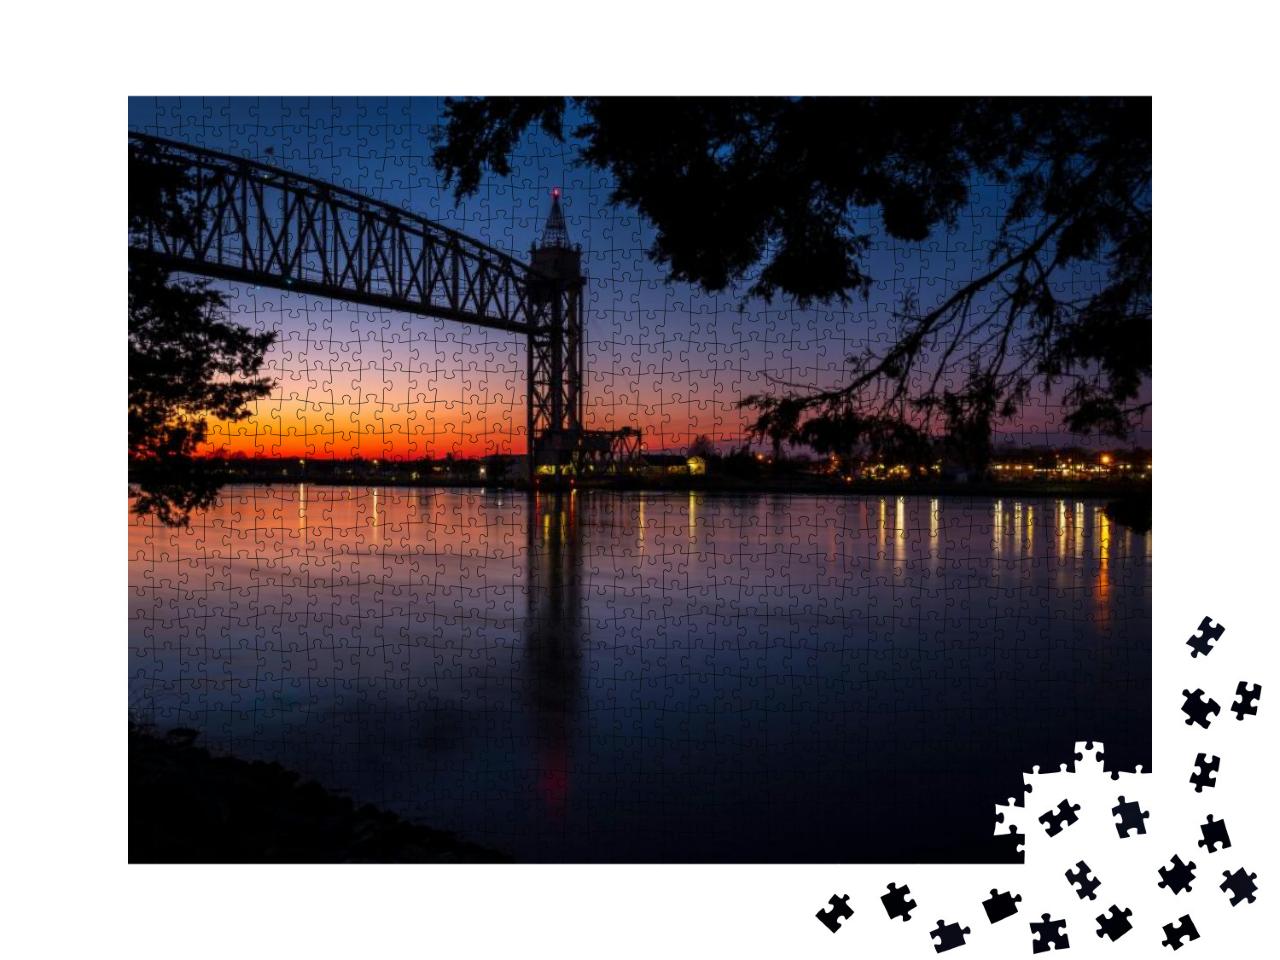 Cape Cod Canal Railroad Bridge At Night... Jigsaw Puzzle with 1000 pieces